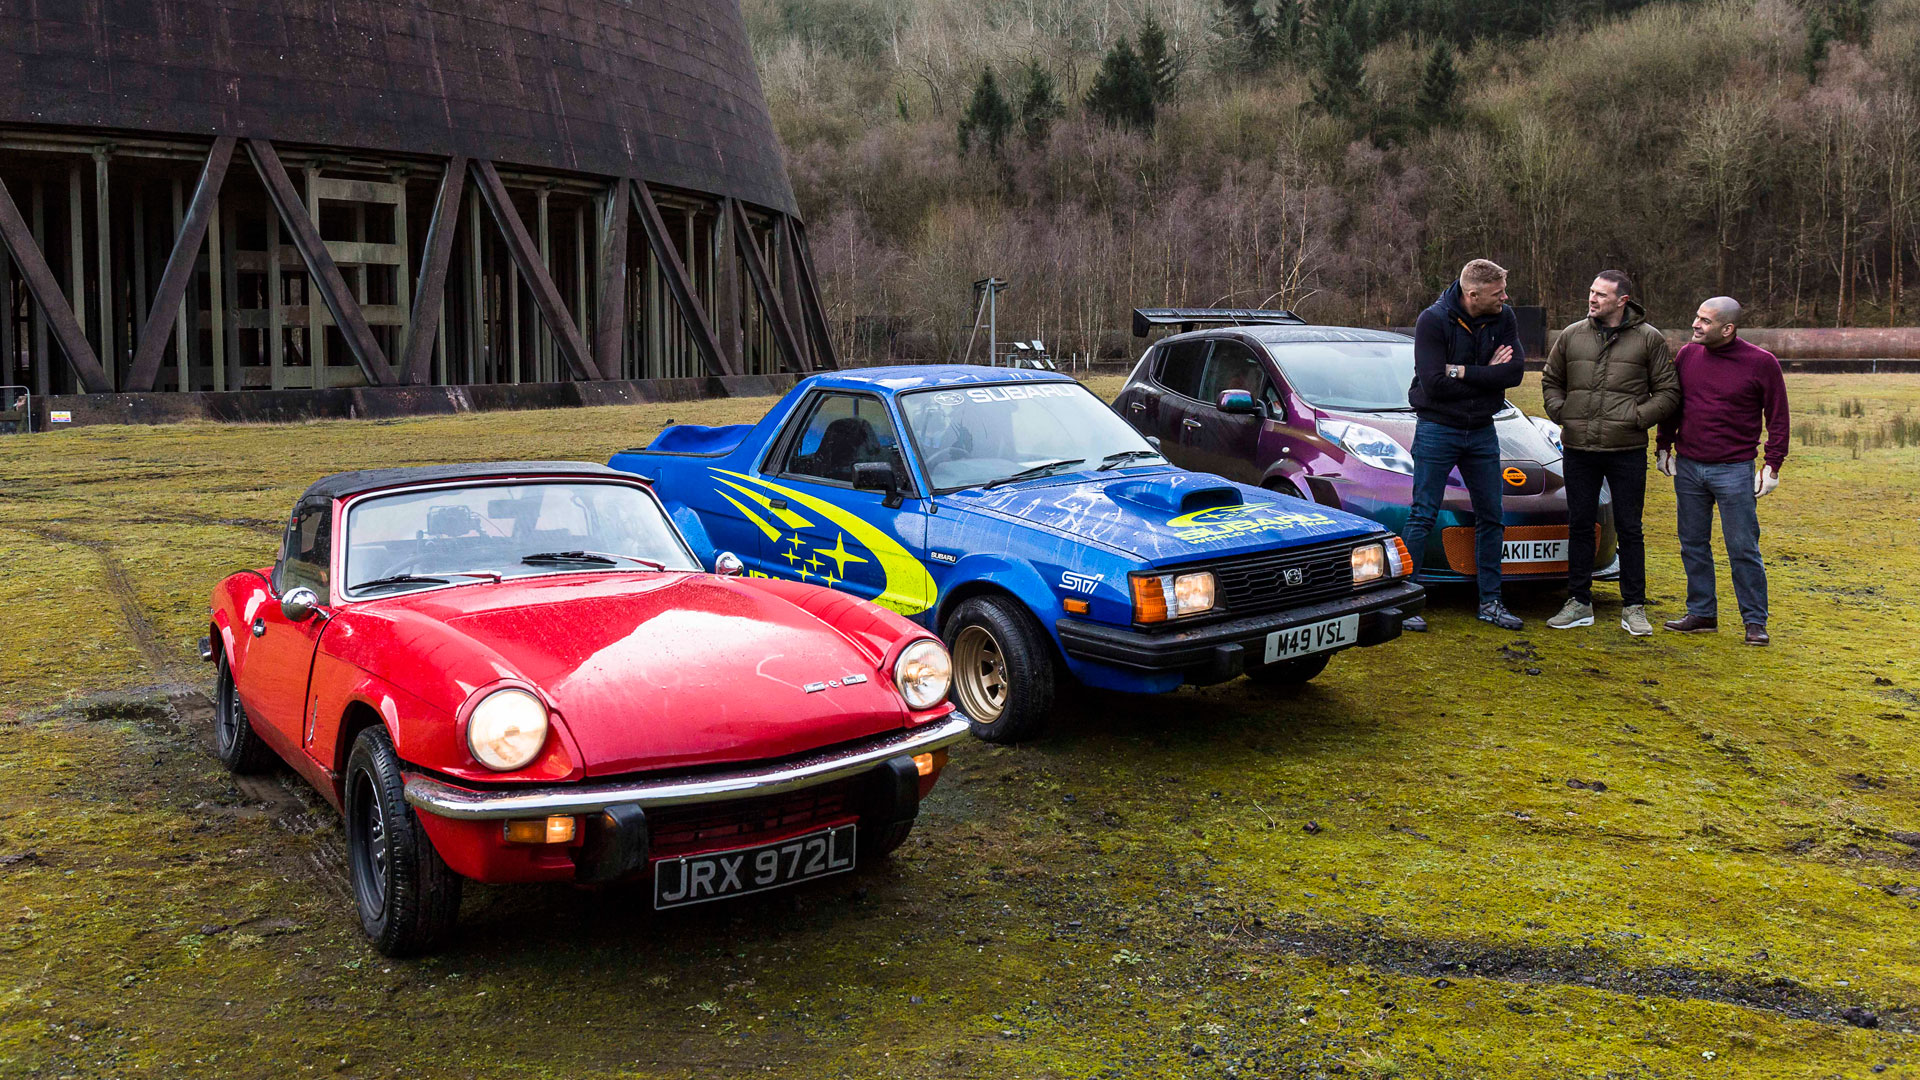 New cars for World of Top Gear display